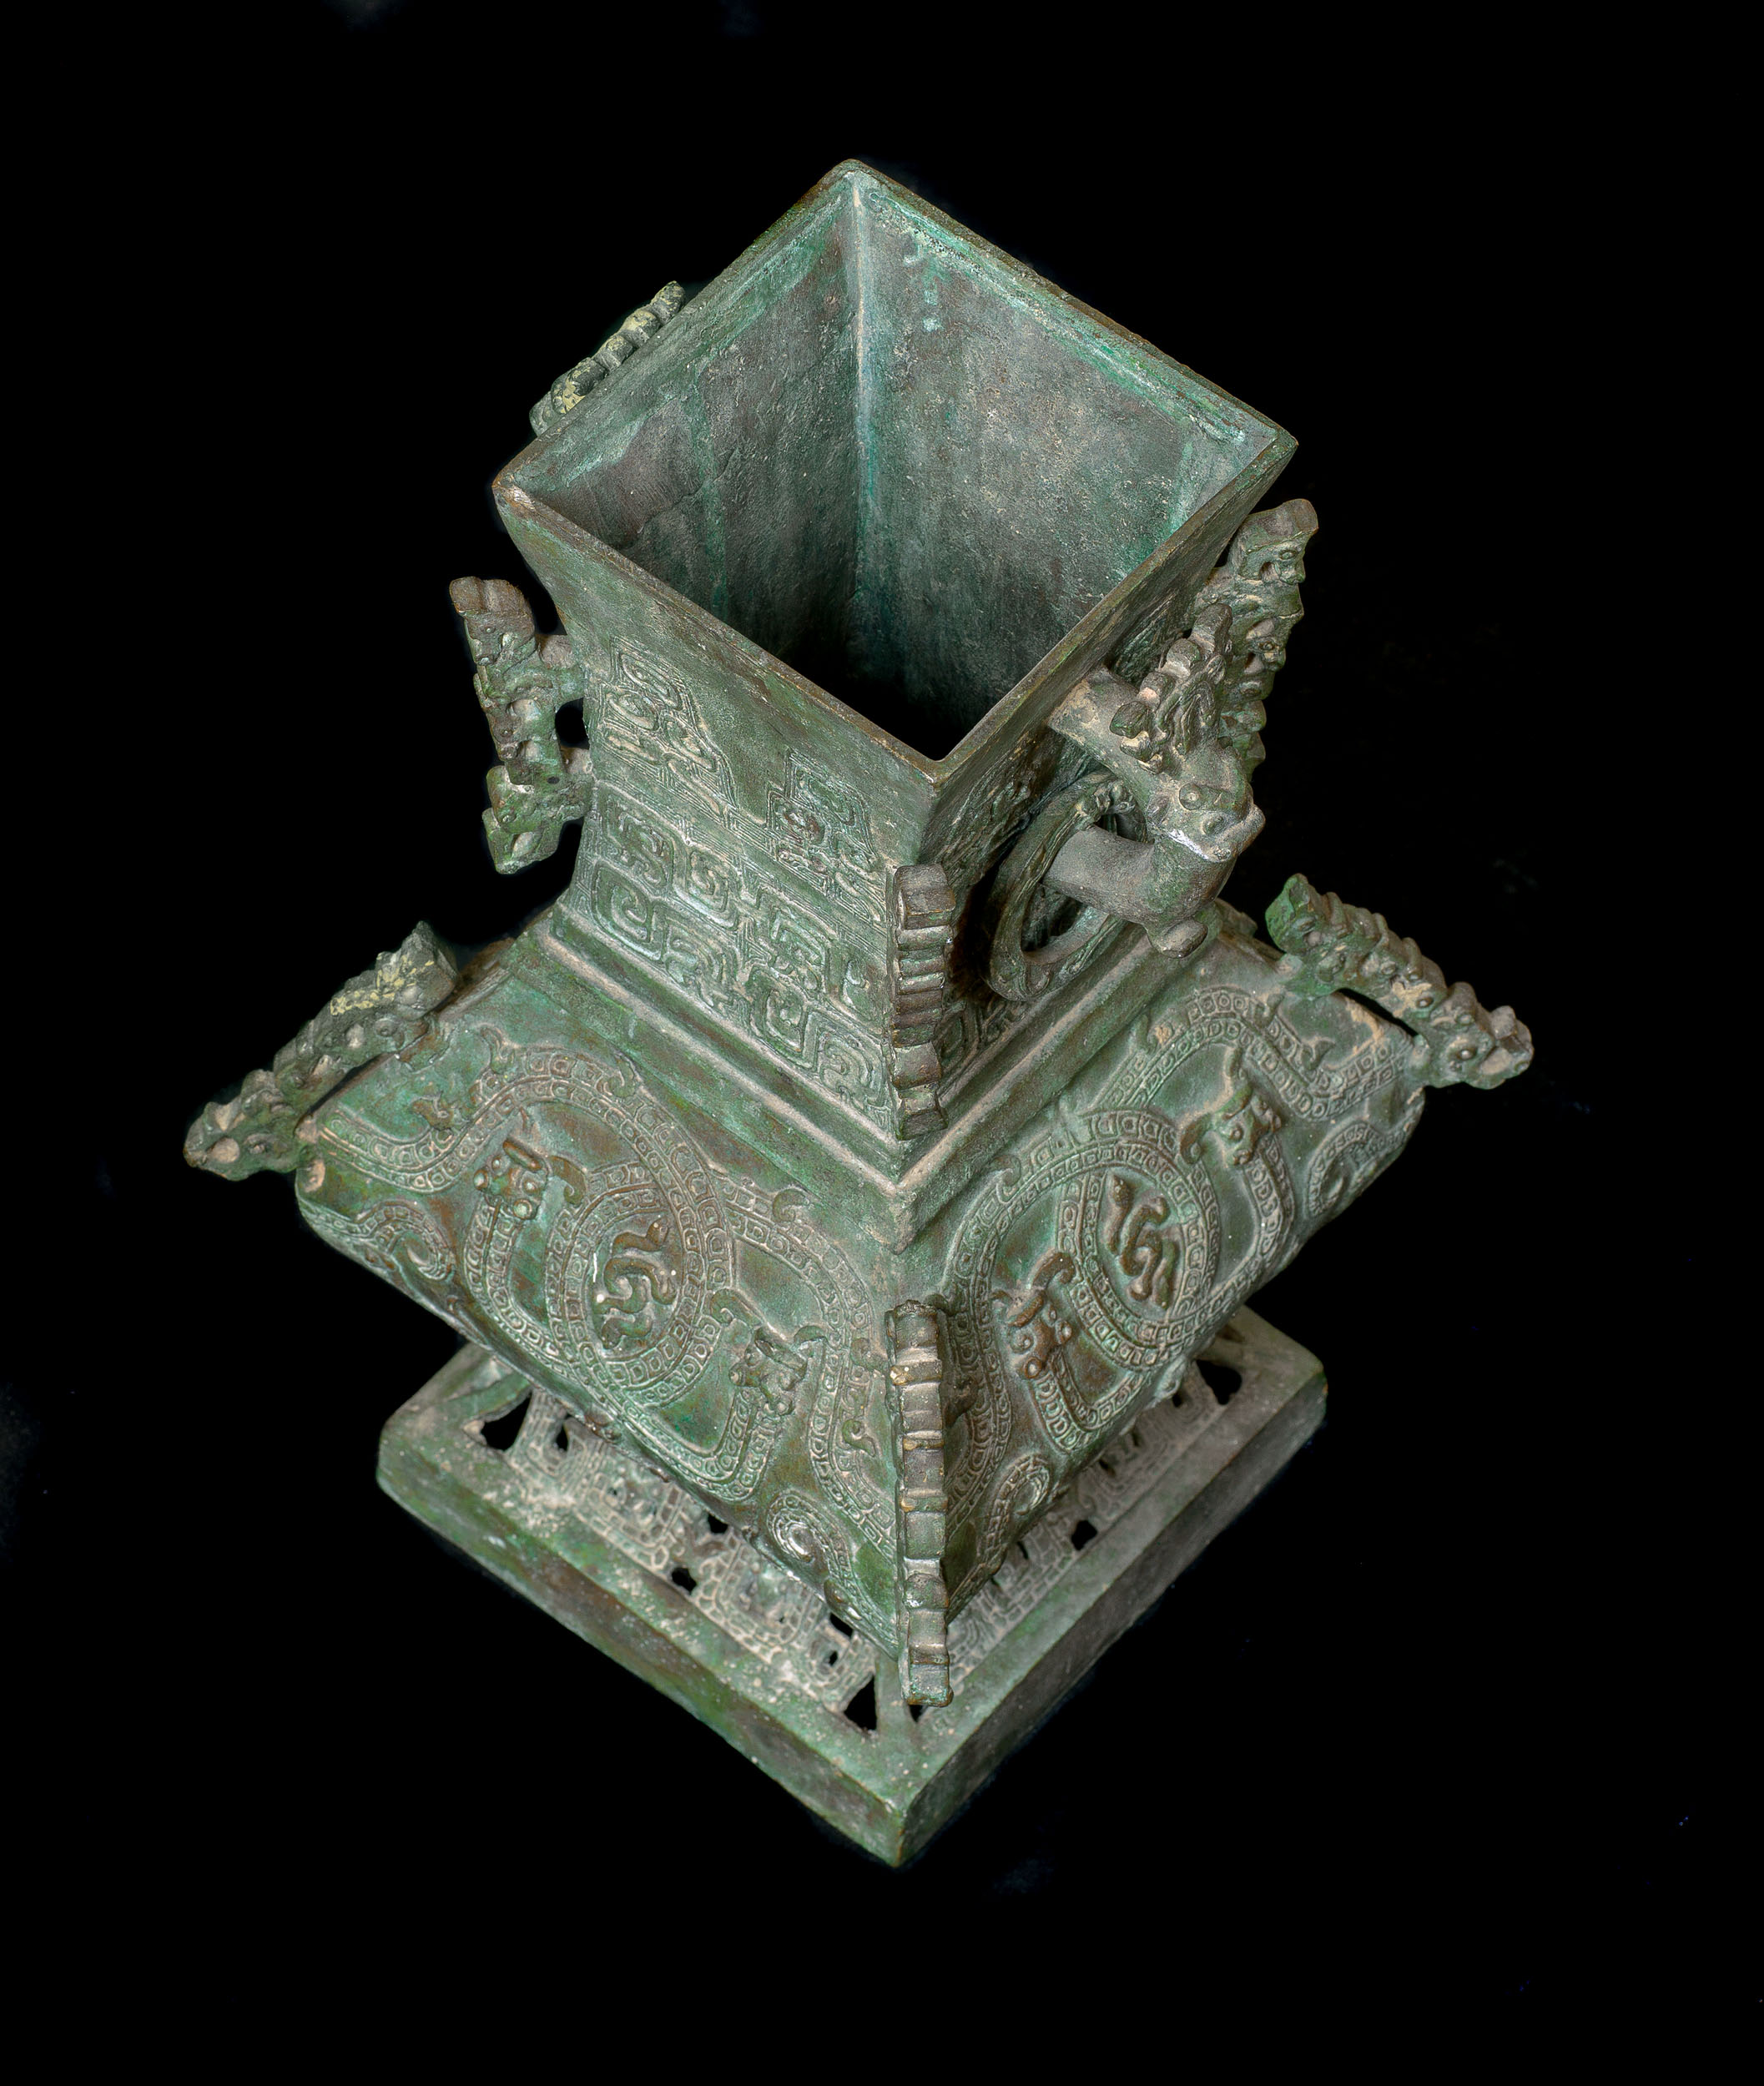 A small Shang Dynasty style bronze vase